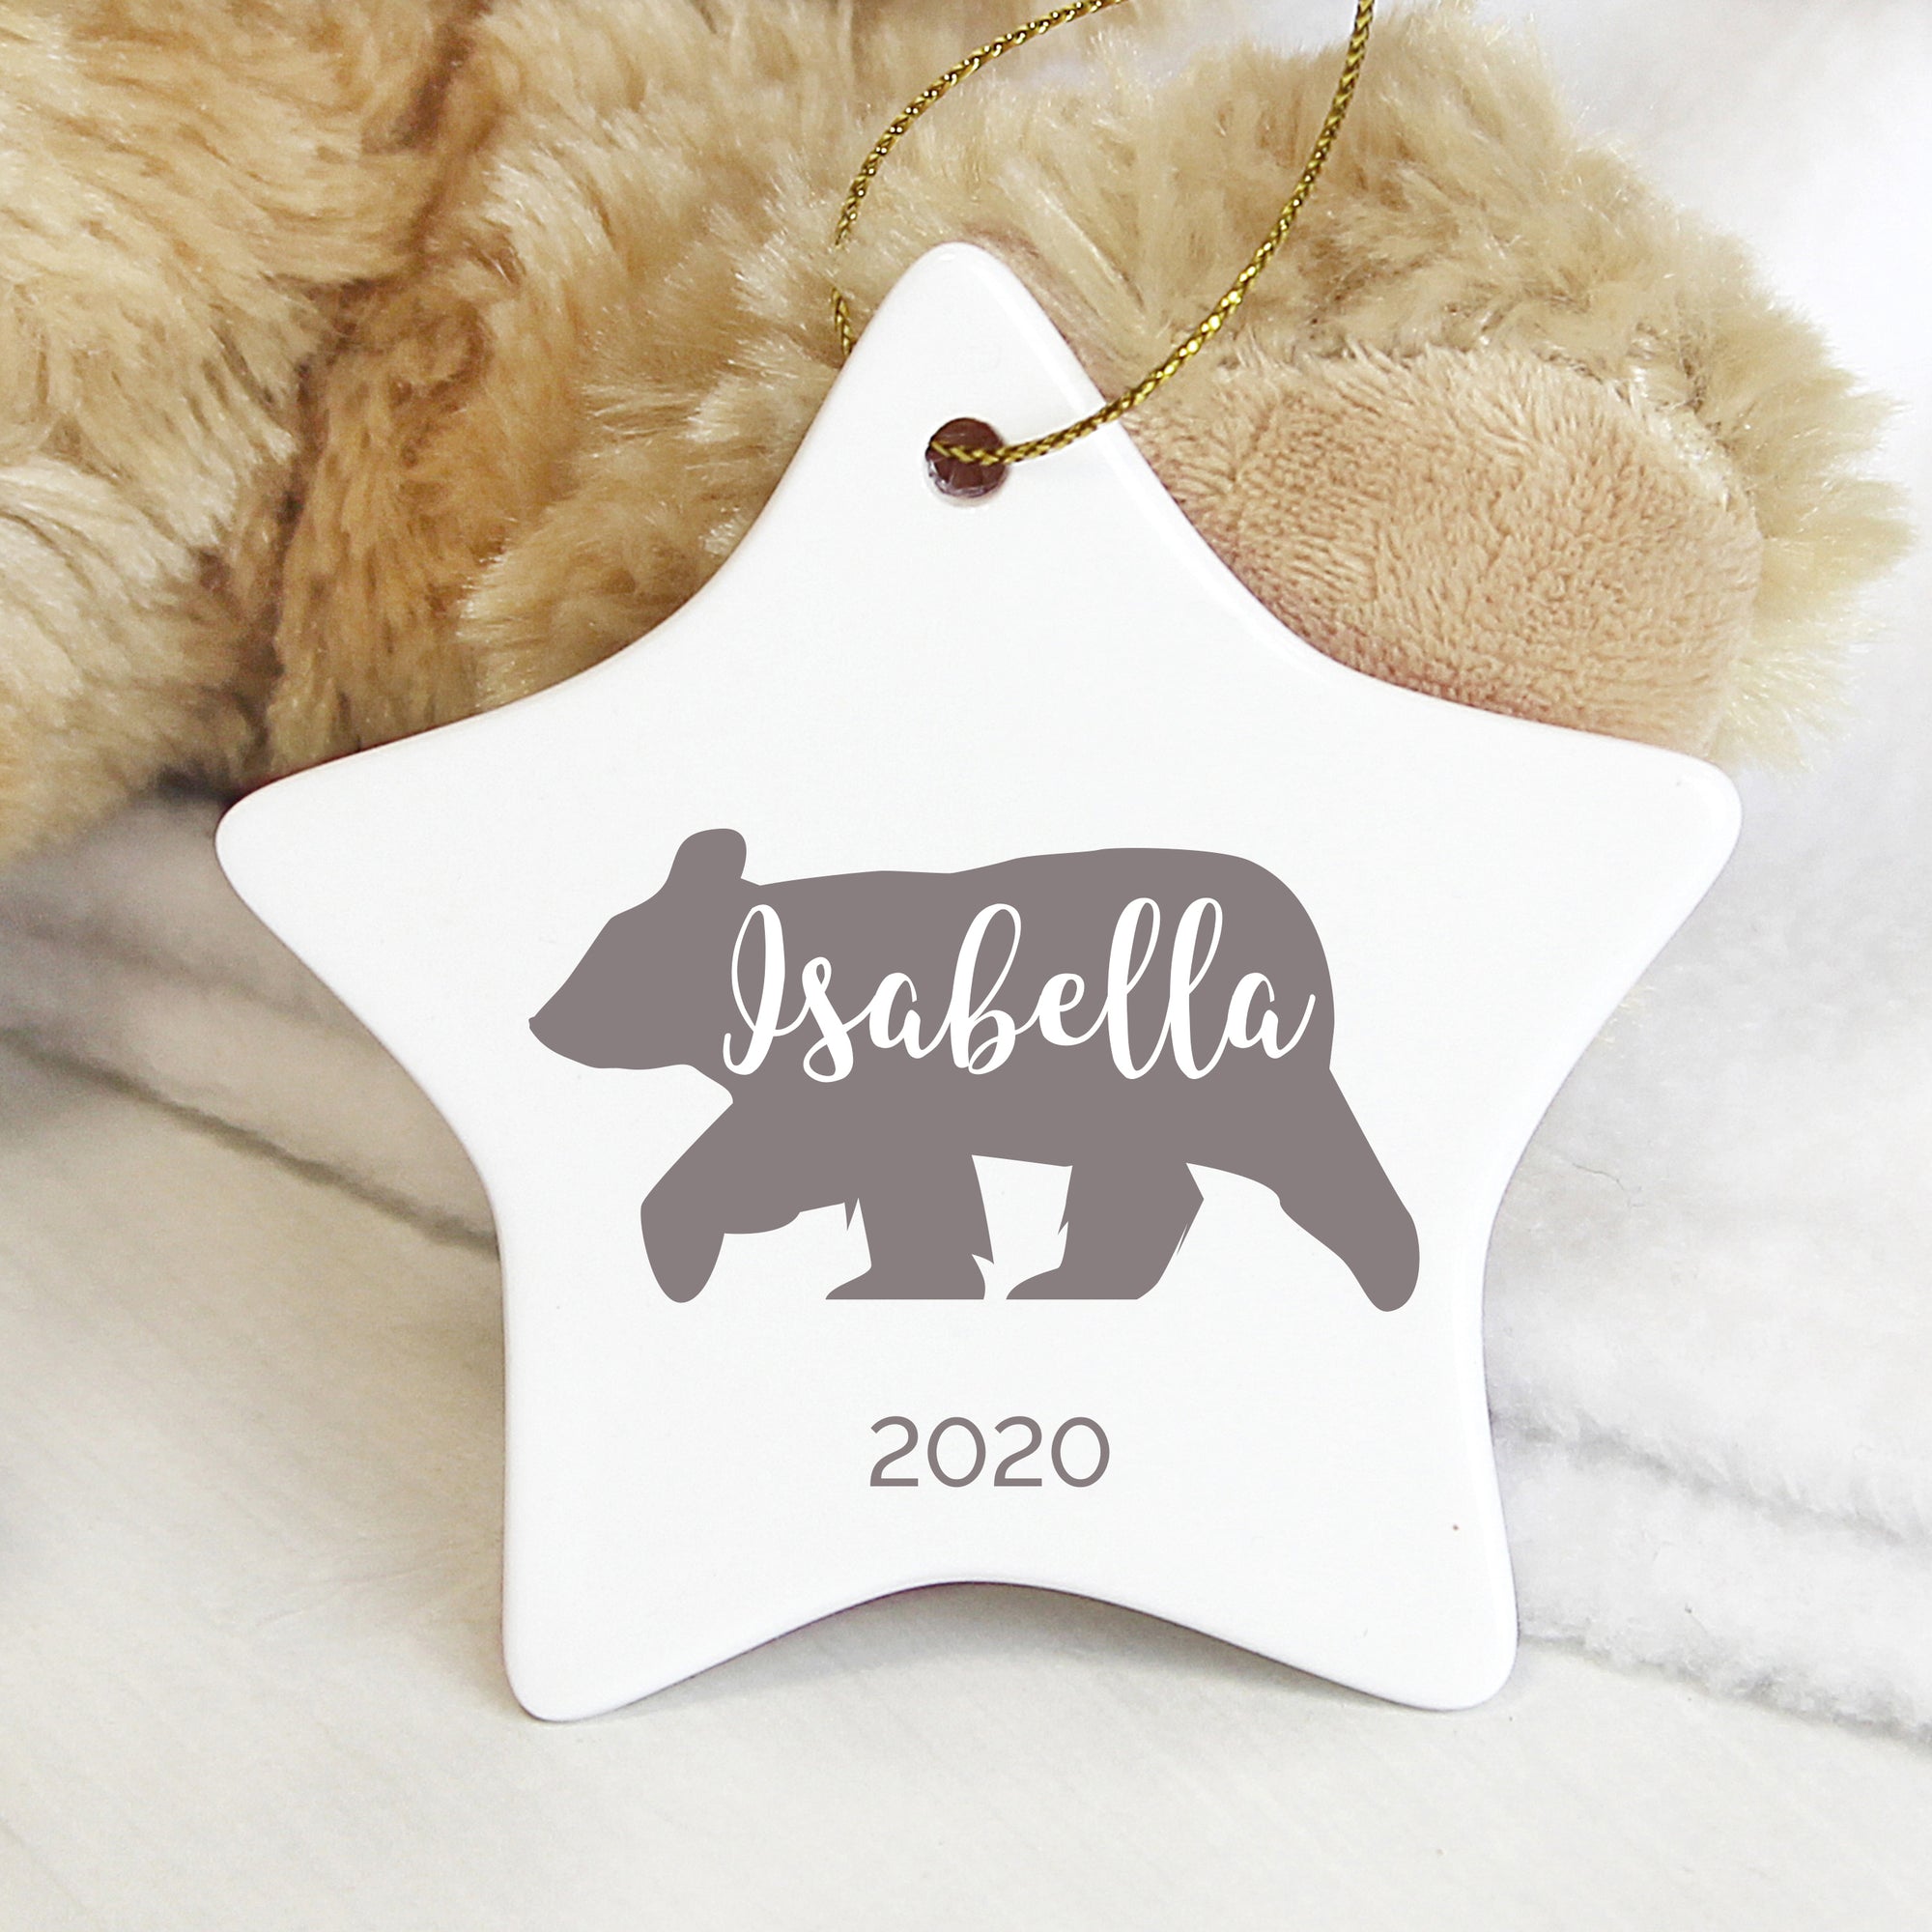 Personalised white ceramic star shaped Christmas tree decoration which features a grey polar bear on the front.  The decoration can be personalised with a name of your choice of up to 12 characters which will be printed in white in a modern hand drawn style font within the polar bear and you have the option to add a date which will be printed below the star, of up to 20 characters.